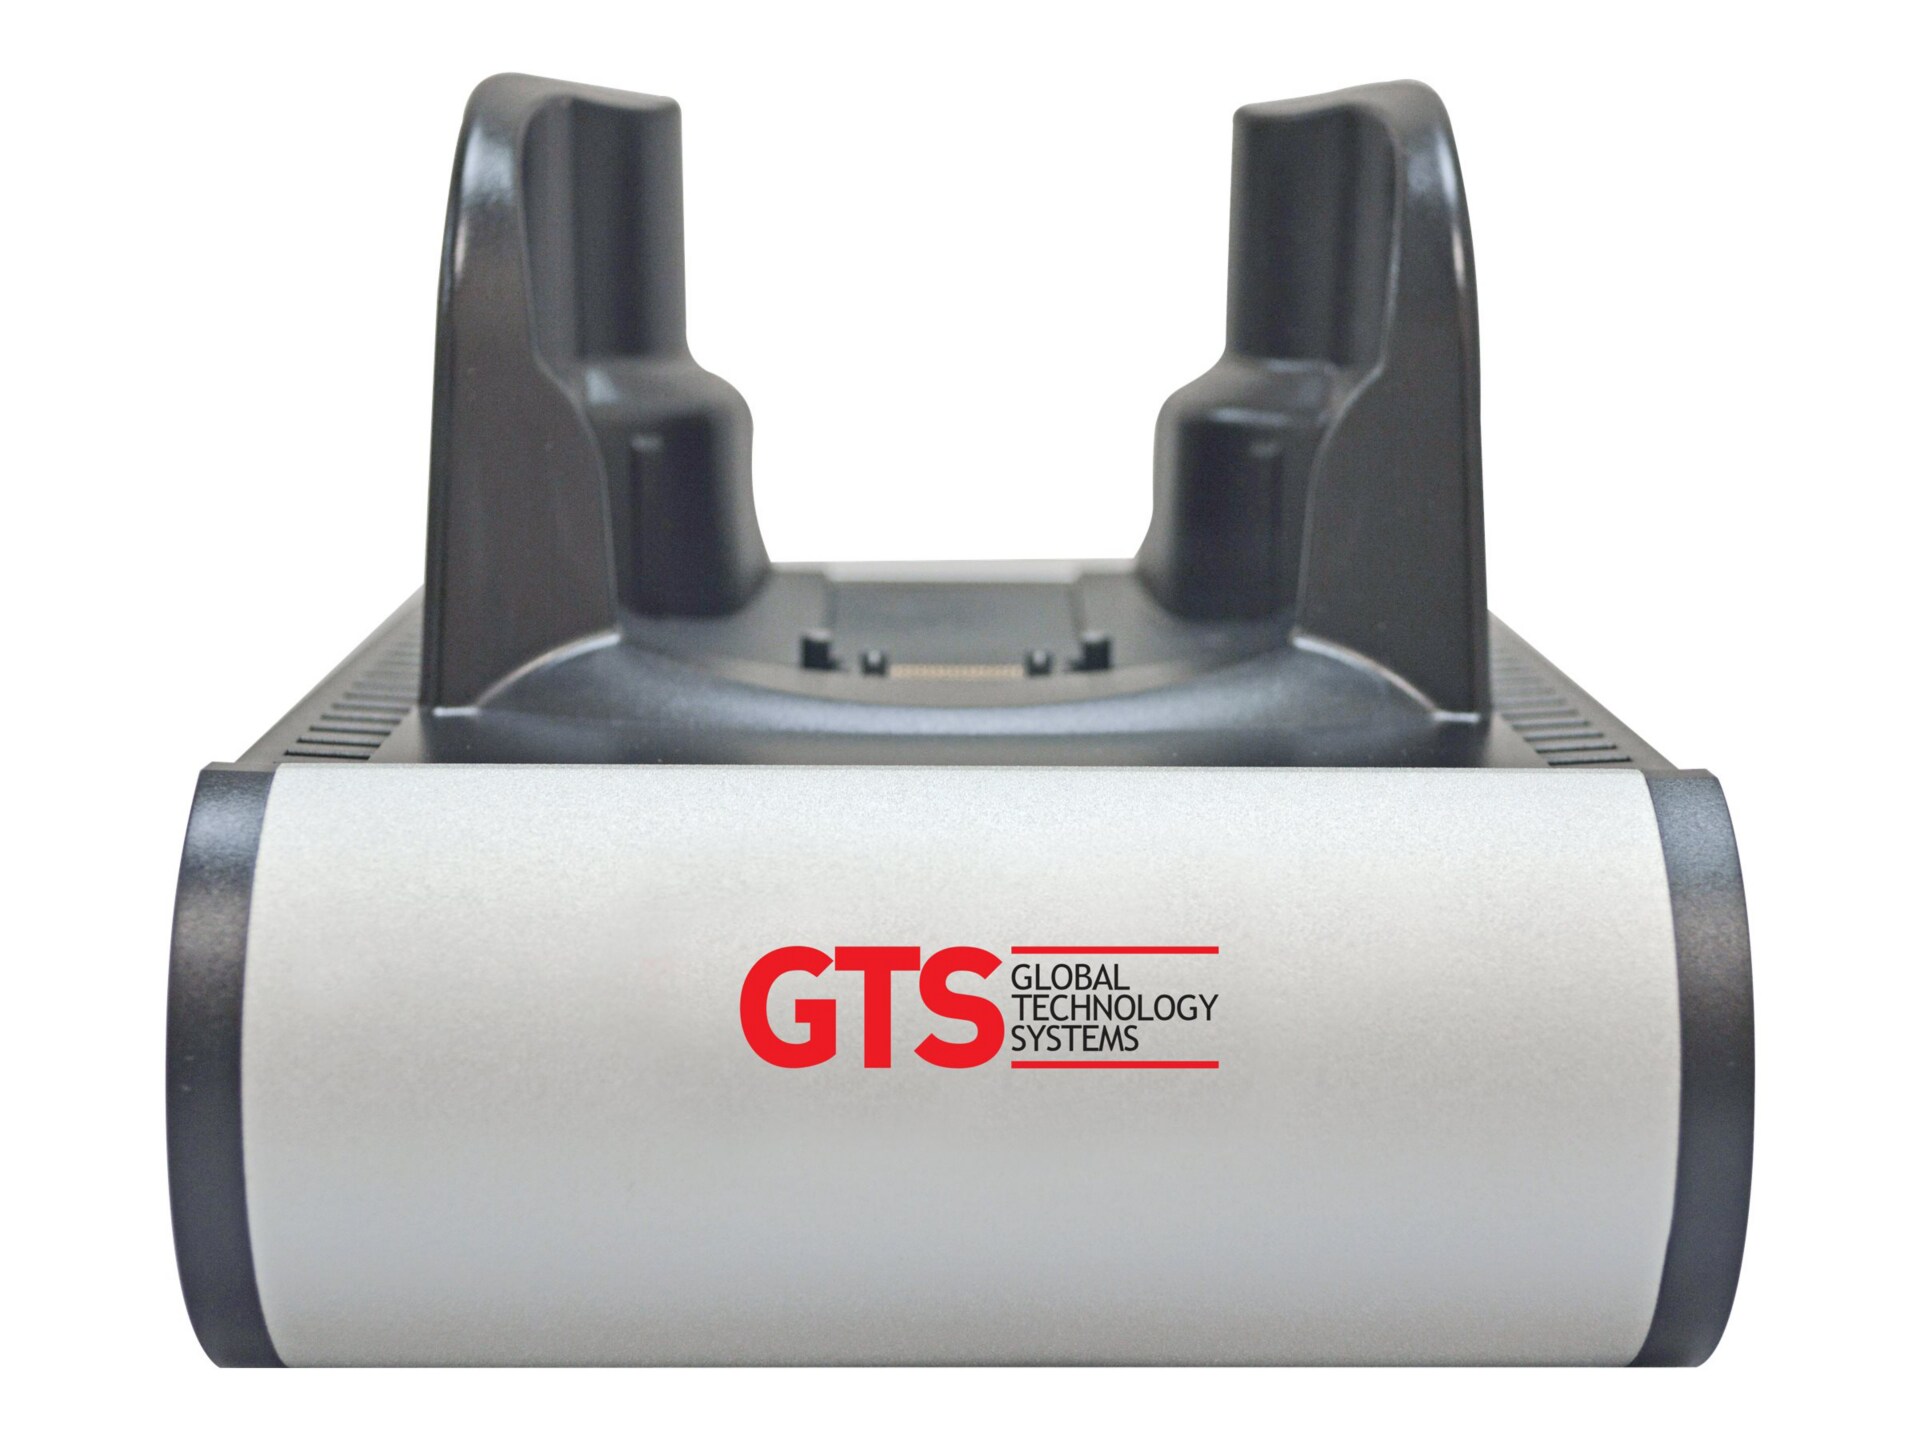 GTS HCH-7010-CHG Single Cradle Charger - barcode scanner charging stand